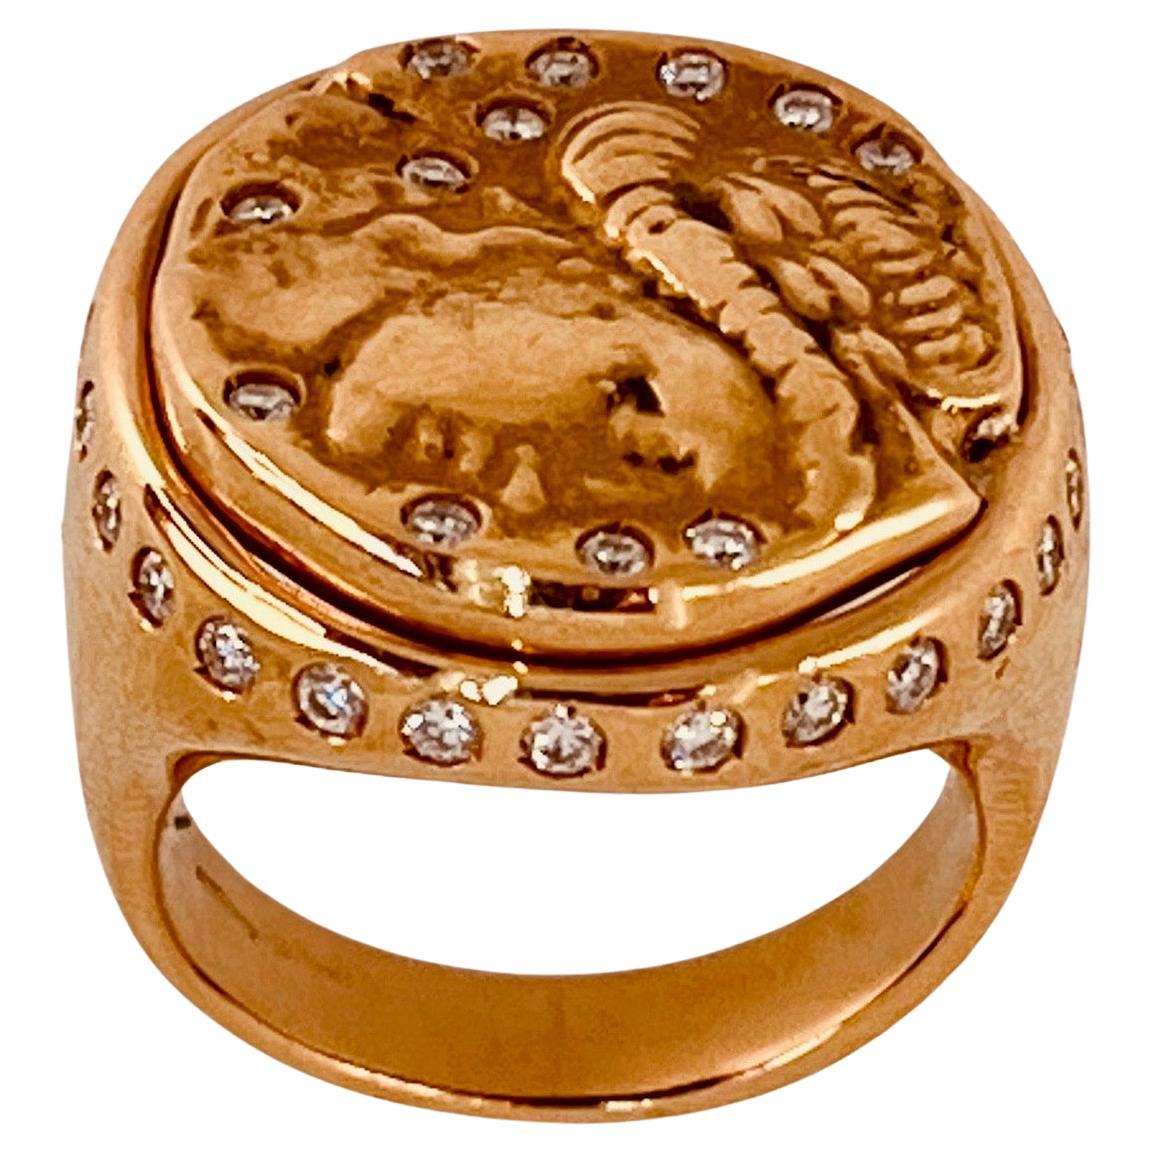 Gavello 18ct gold and diamond ring, centring an image of Alexander The Great with random set diamonds and a line of diamonds set along the bezel. Signet ring, 21mm diameter. Weight: 15.8 grames. Approx. diamond weight: 0.8ct. Ring is resizable. Size